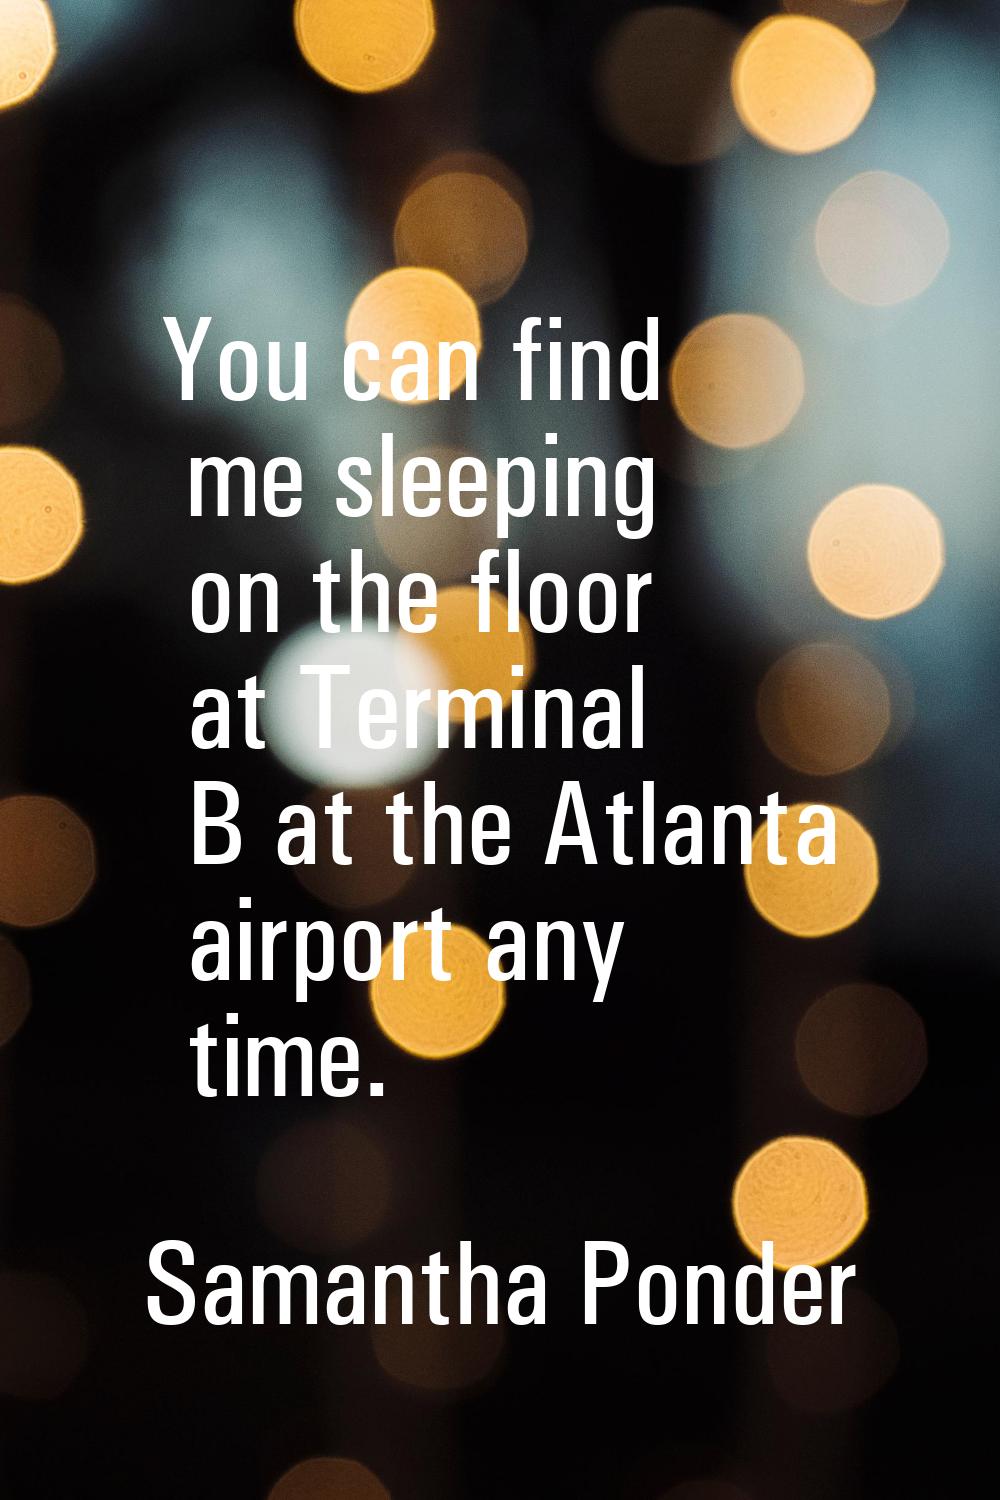 You can find me sleeping on the floor at Terminal B at the Atlanta airport any time.